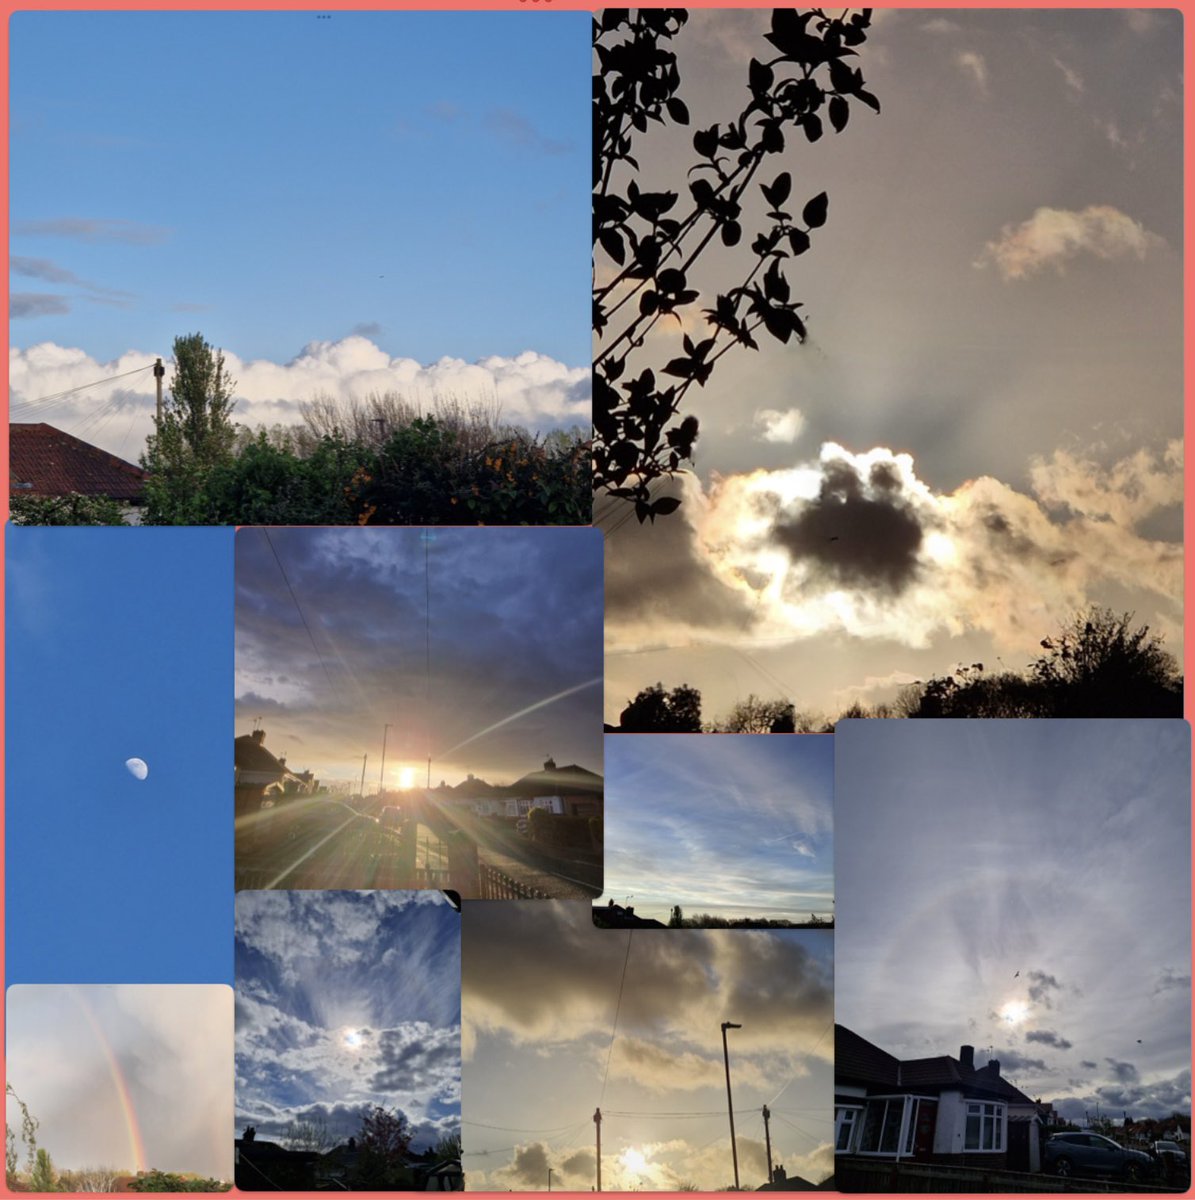 #GoodMorning again, I’m afraid you’ll be sick of me today, just scroll on by. But I’m away to Edinburgh for the day tomorrow so won’t be on much. A little look at some of this week’s lovely skies in Heaton 🥰 #StormHour #ThursdayFunDay #ThursdayVibes